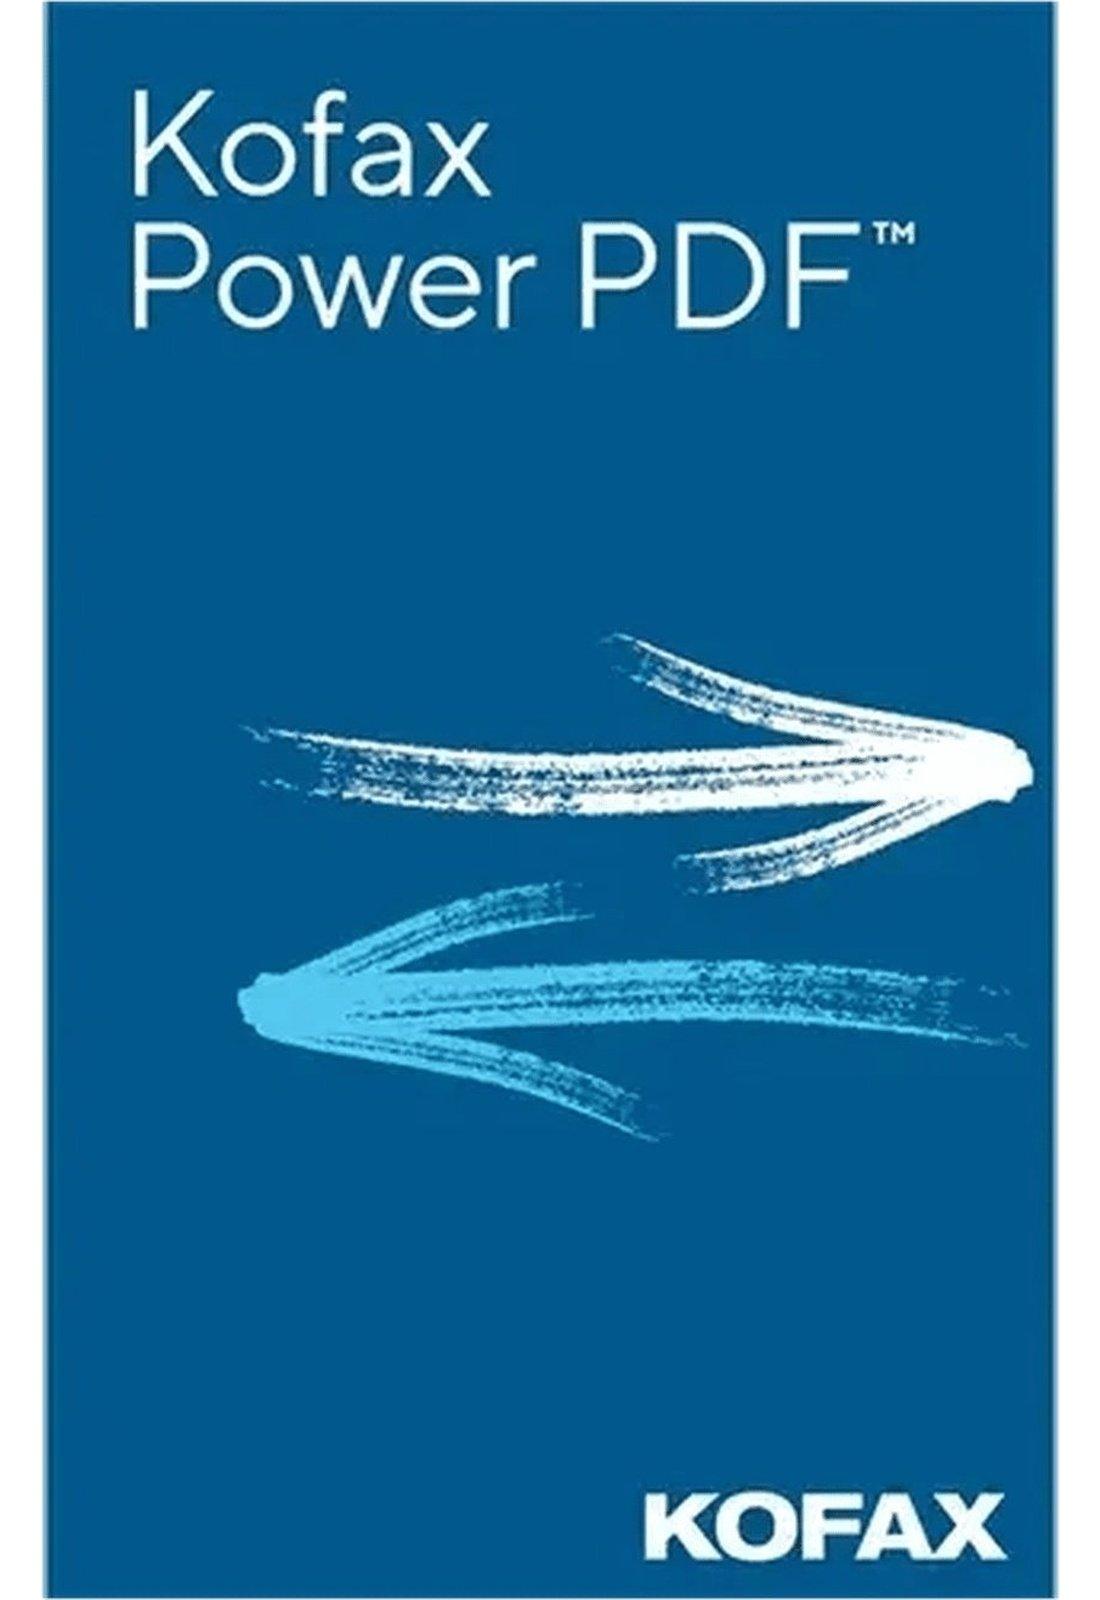 Kofax Power PDF 4.0 Standard - Instant Download for Windows (1 Computer) - SoftwareCW - Authorized Reseller